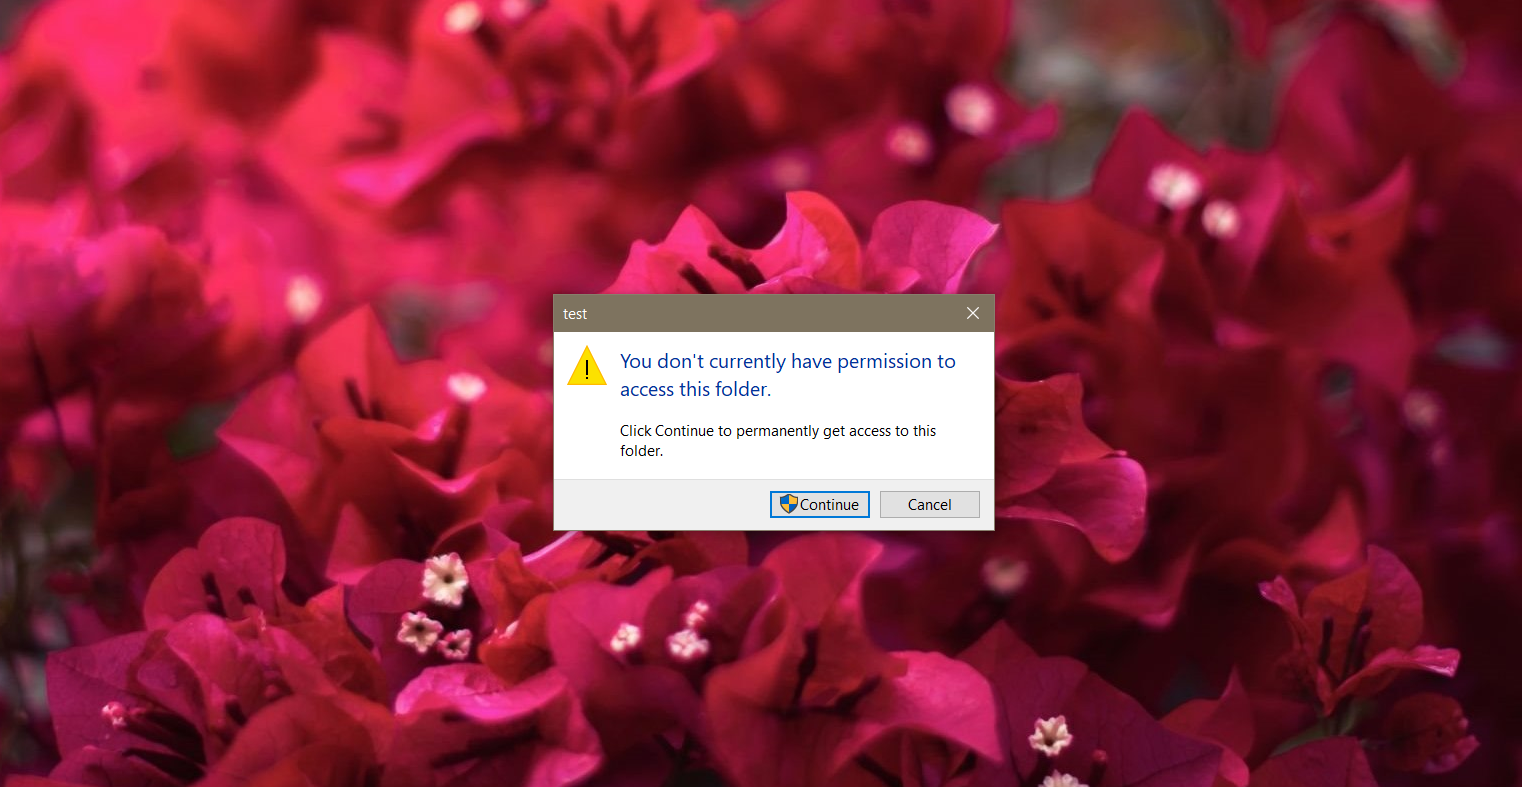 Easy Ways to Fix “You Don’t Have Permission to Access this folder”